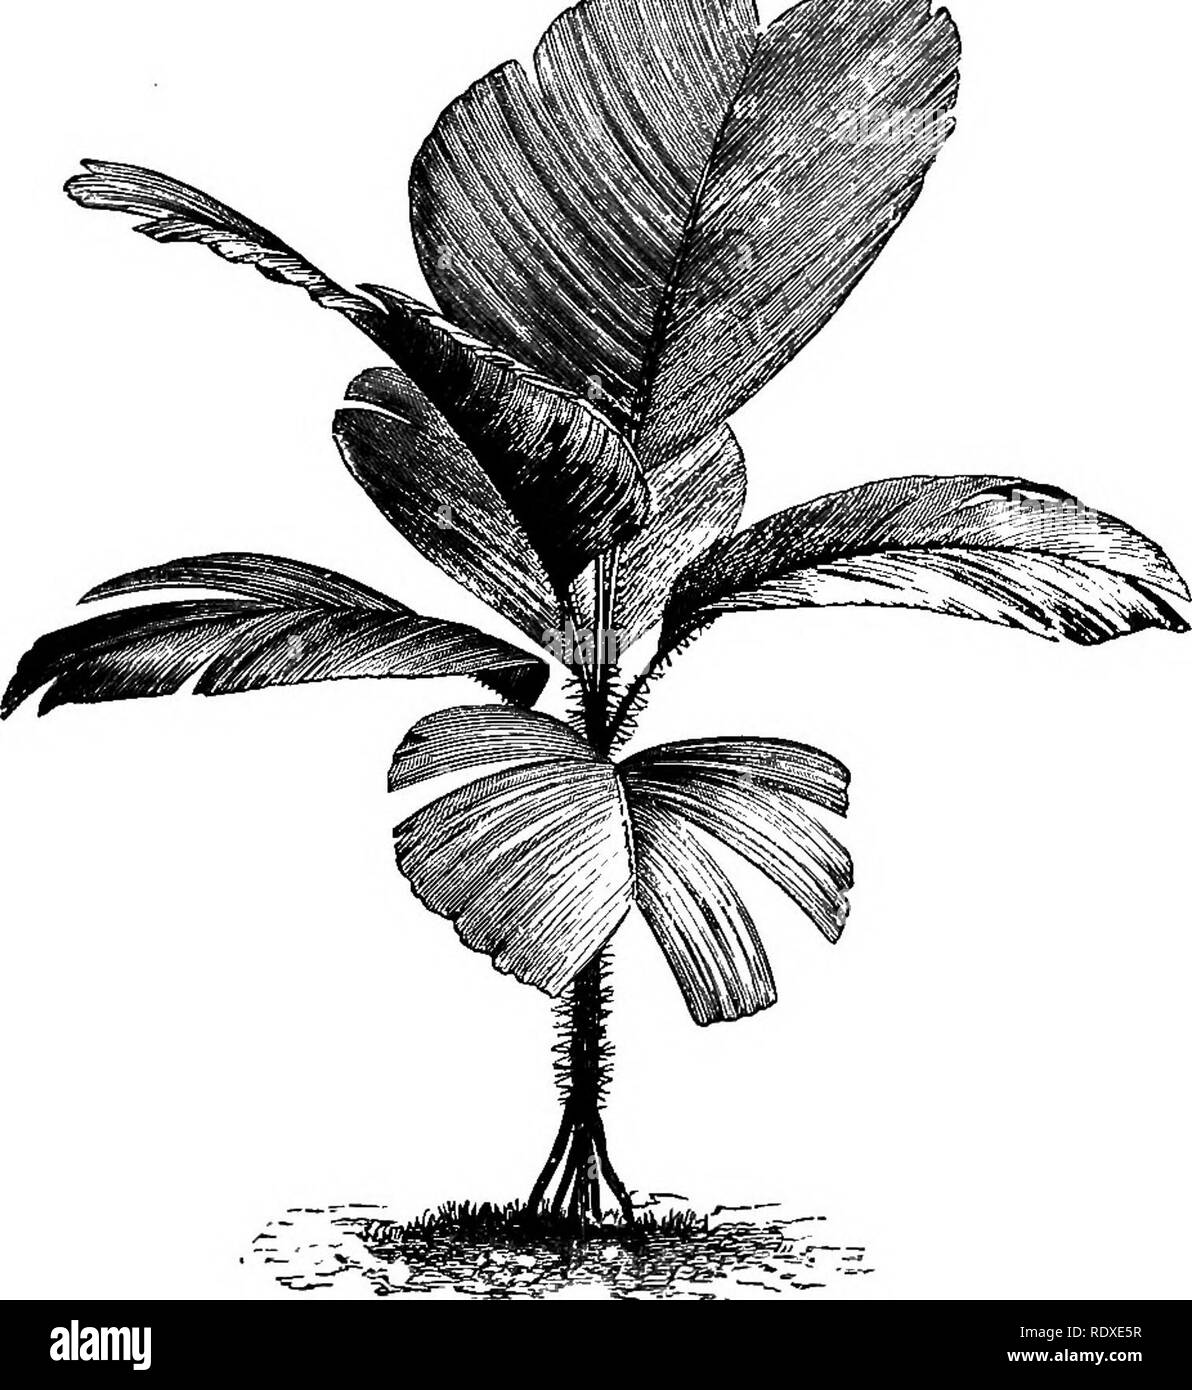 . The Book of gardening; a handbook of horticulture. Gardening; Horticulture. ON PALMS, CYCADS, AND BAMBOOS. 853 V. splendida {Regelia magnified, R. majestica, and R. princeps) deserves to.be more largely grown on account of its decorative properties (Fig. 571). It possesses a slender stem, supported on an inverted, cone of roots. The petioles, which are sheathing, are, like, the stem, clothed with sharp black spines. The leaves, which vary from â 4ft. to 7 ft. long, are cuneate - ob- ovate, and of a bright green. This, plant often attains in its native country a height of 80ft. Wallichia.-âA  Stock Photo